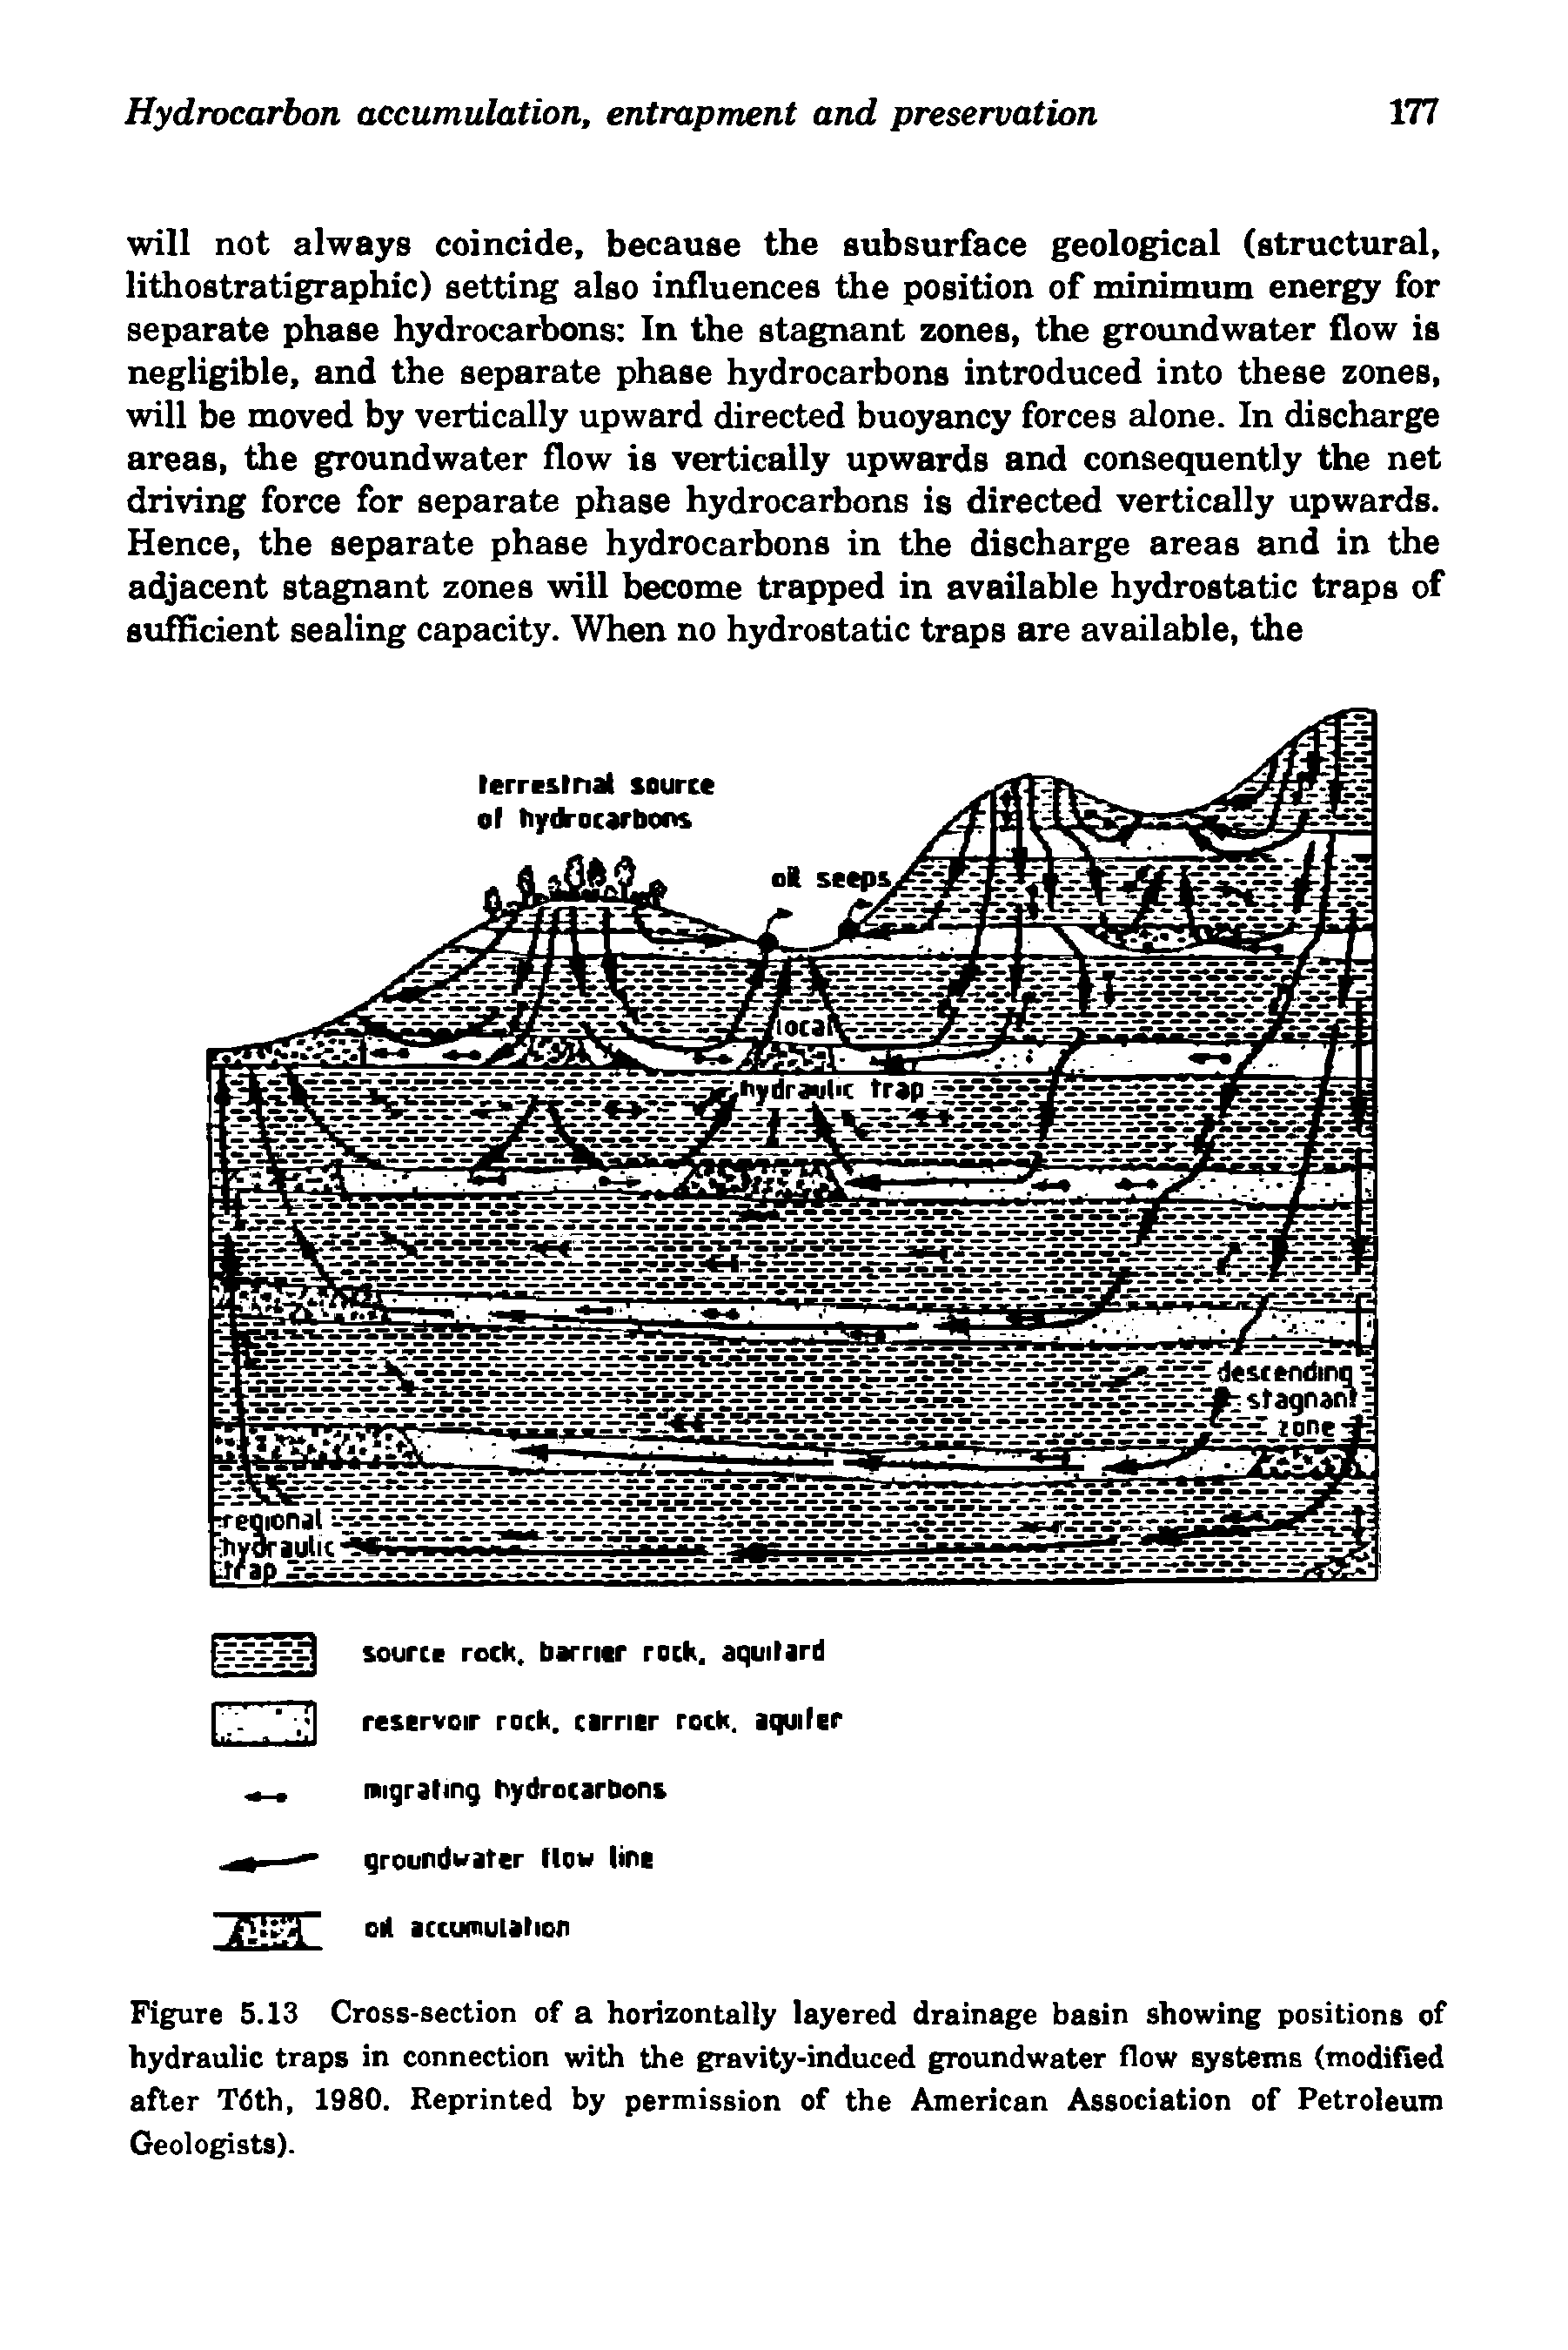 Figure 5.13 Cross-section of a horizontally layered drainage basin showing positions of hydraulic traps in connection with the gravity-induced groundwater flow systems (modified after Tdth, 1980. Reprinted by permission of the American Association of Petroleum Geologists).